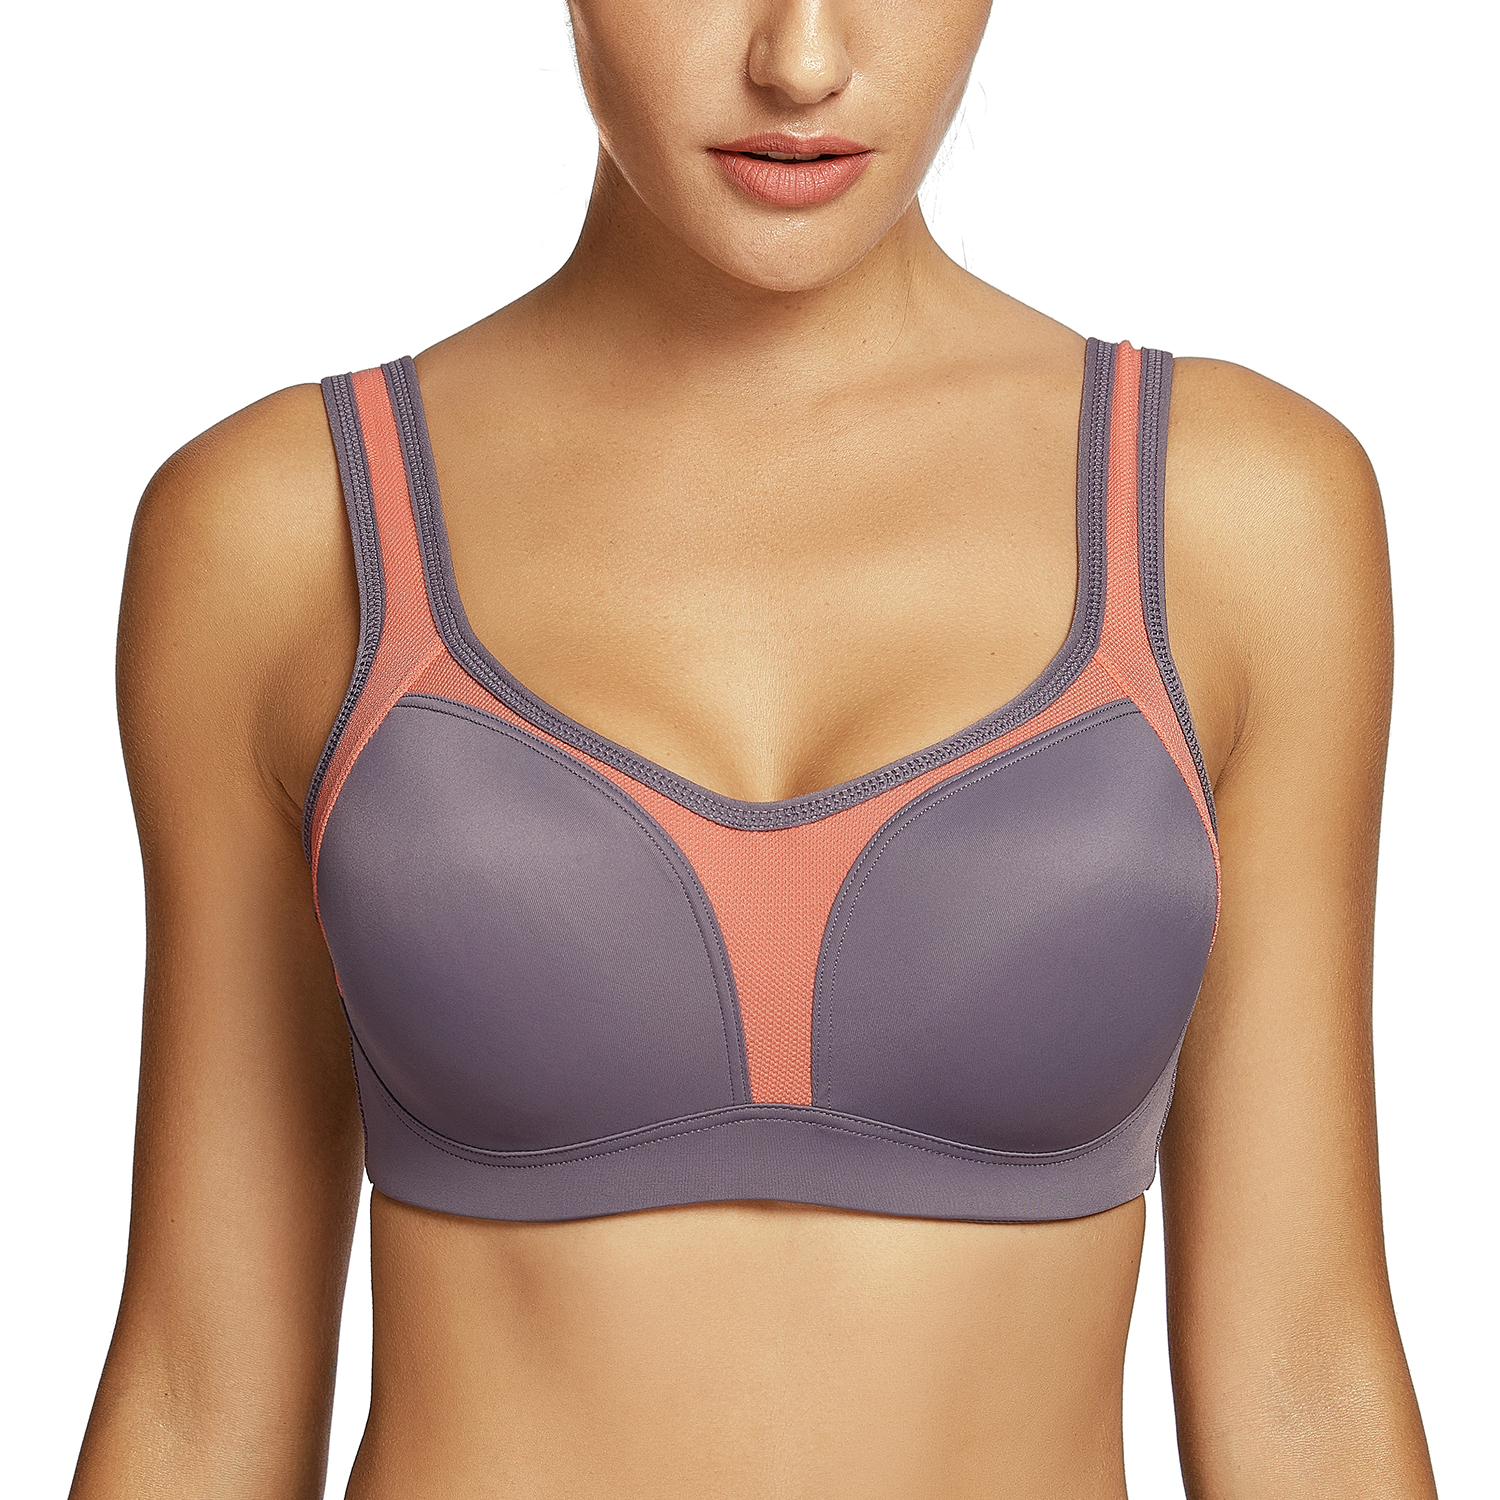 Buy SYROKAN Women's High Impact Firm Support Contour Padded